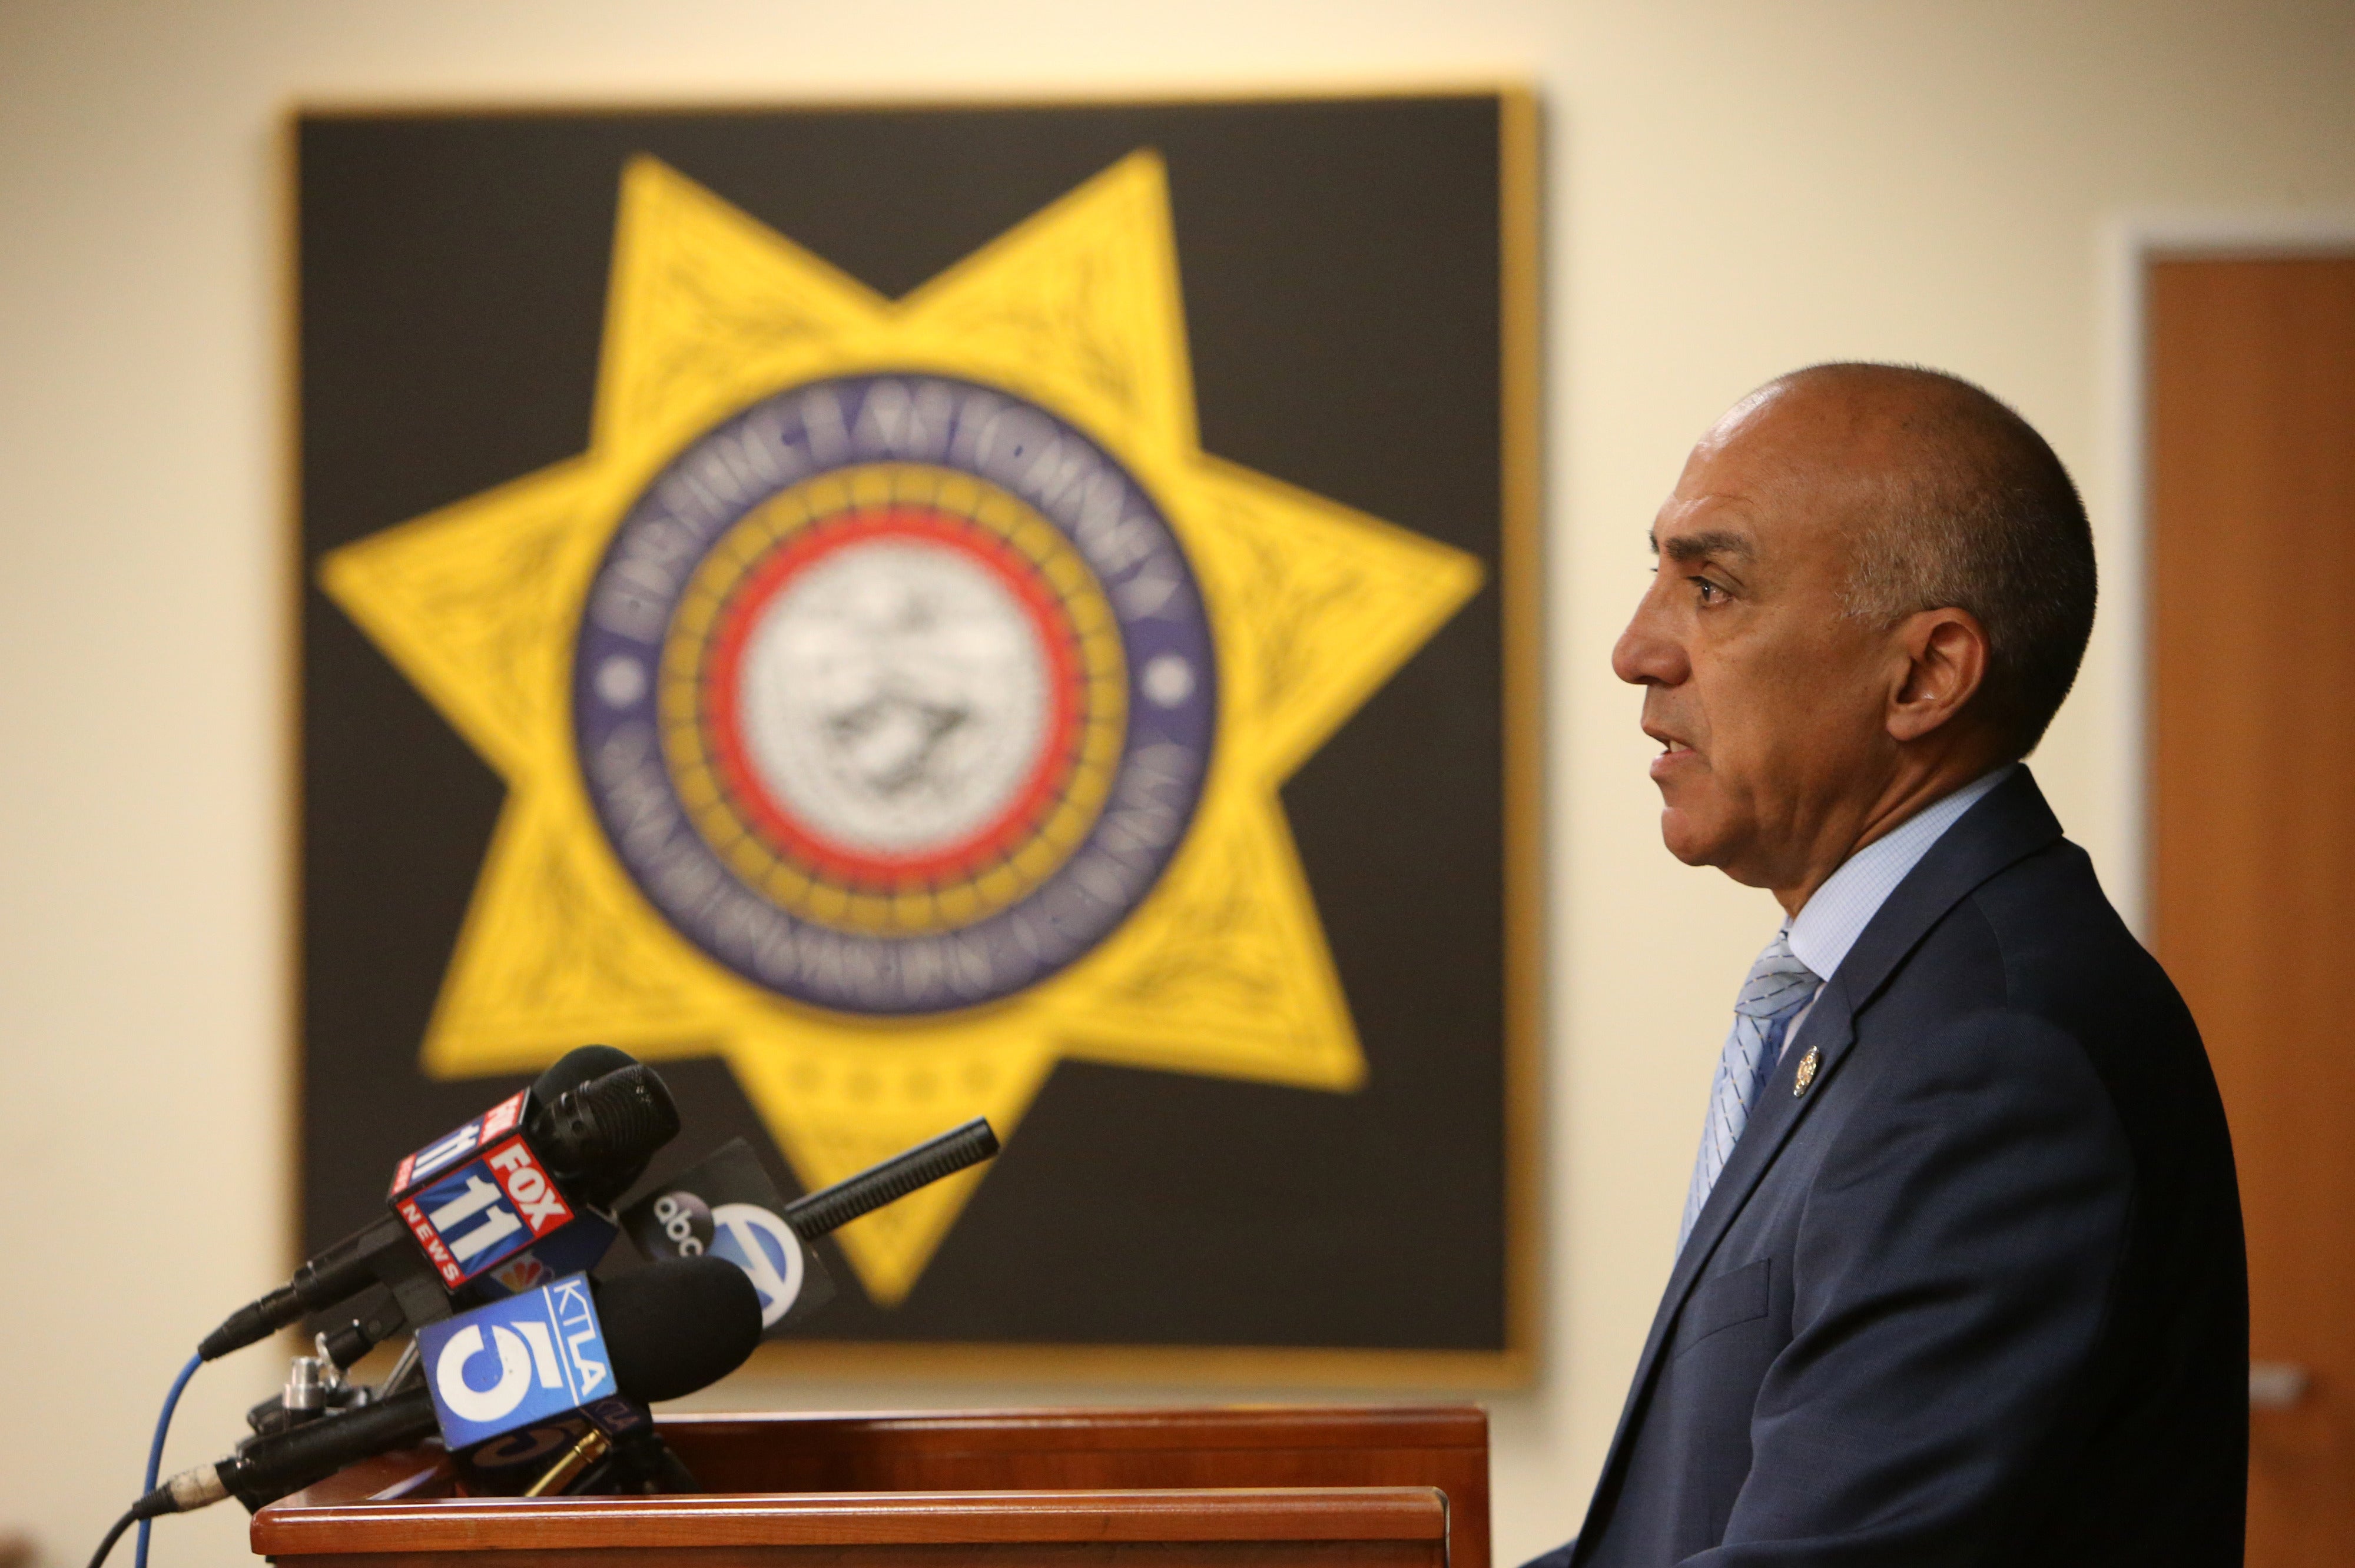 San Bernardino District Attorney Mike Ramos discusses the discriminatory comments posted online by San Bernardino County prosecutor Michael Selyem during a press conference